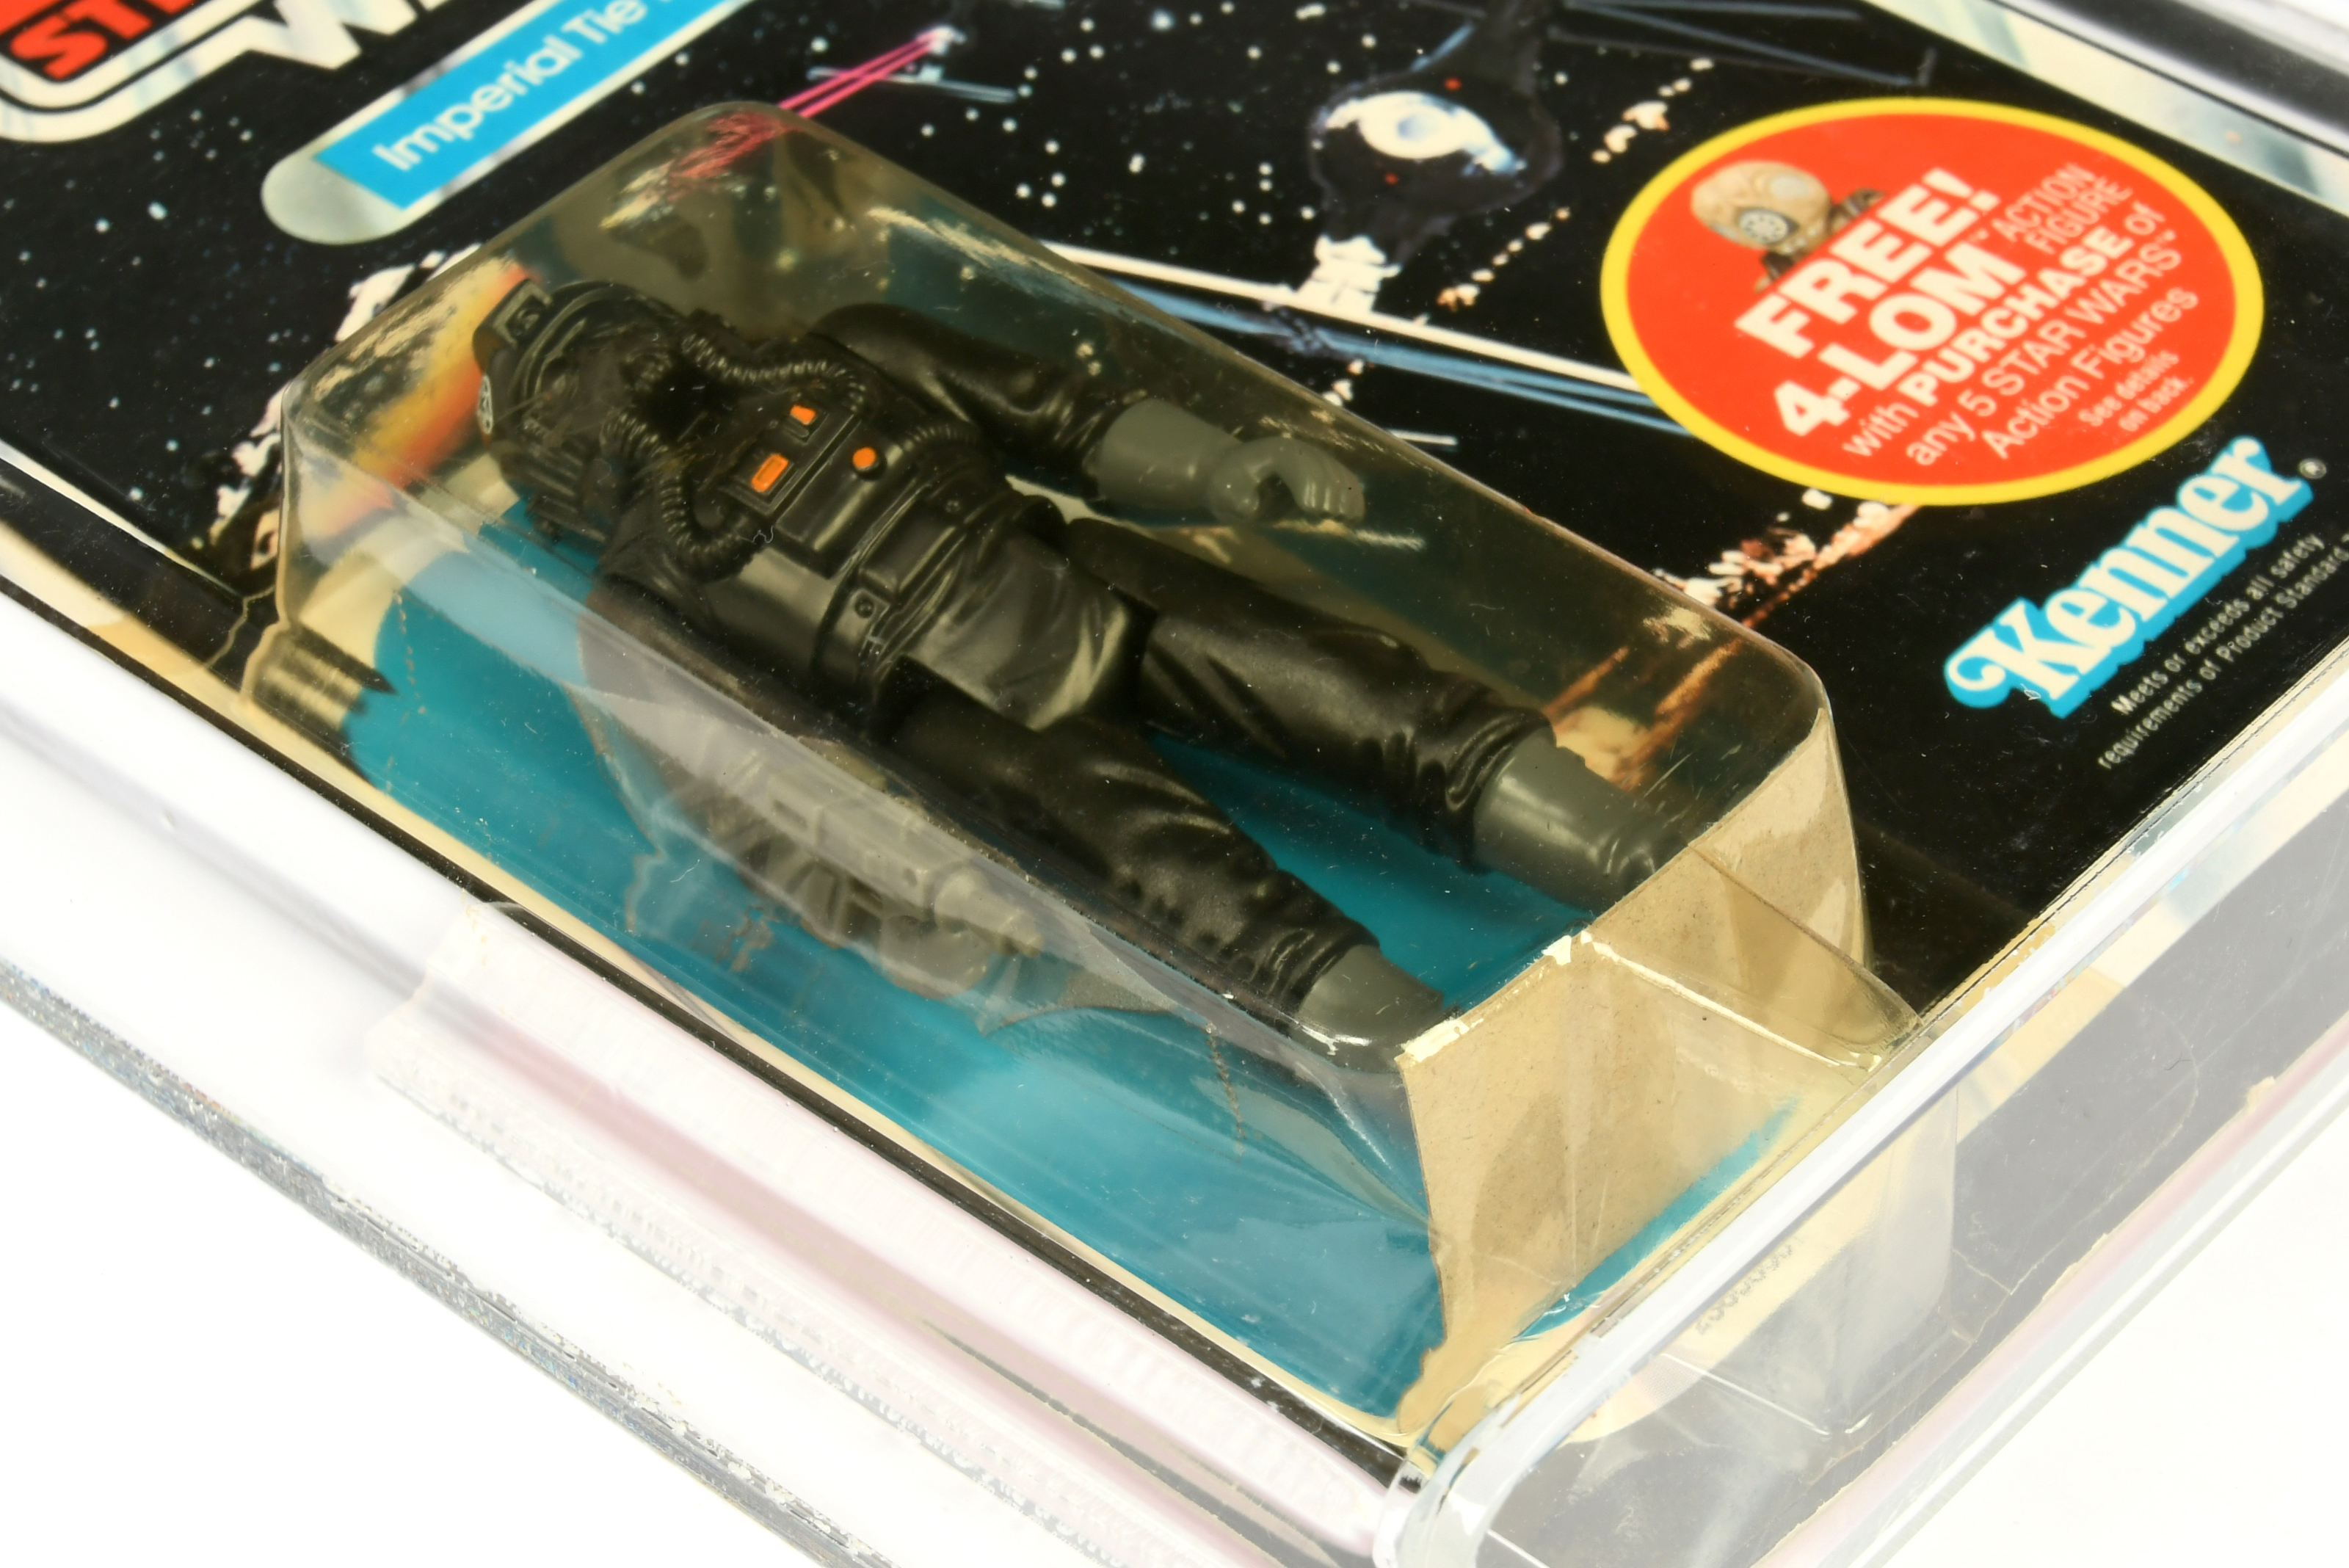 Kenner Star Wars The Empire Strikes Back Imperial TIE Fighter Pilot 3 3/4" Vintage Graded Figure - Image 3 of 5